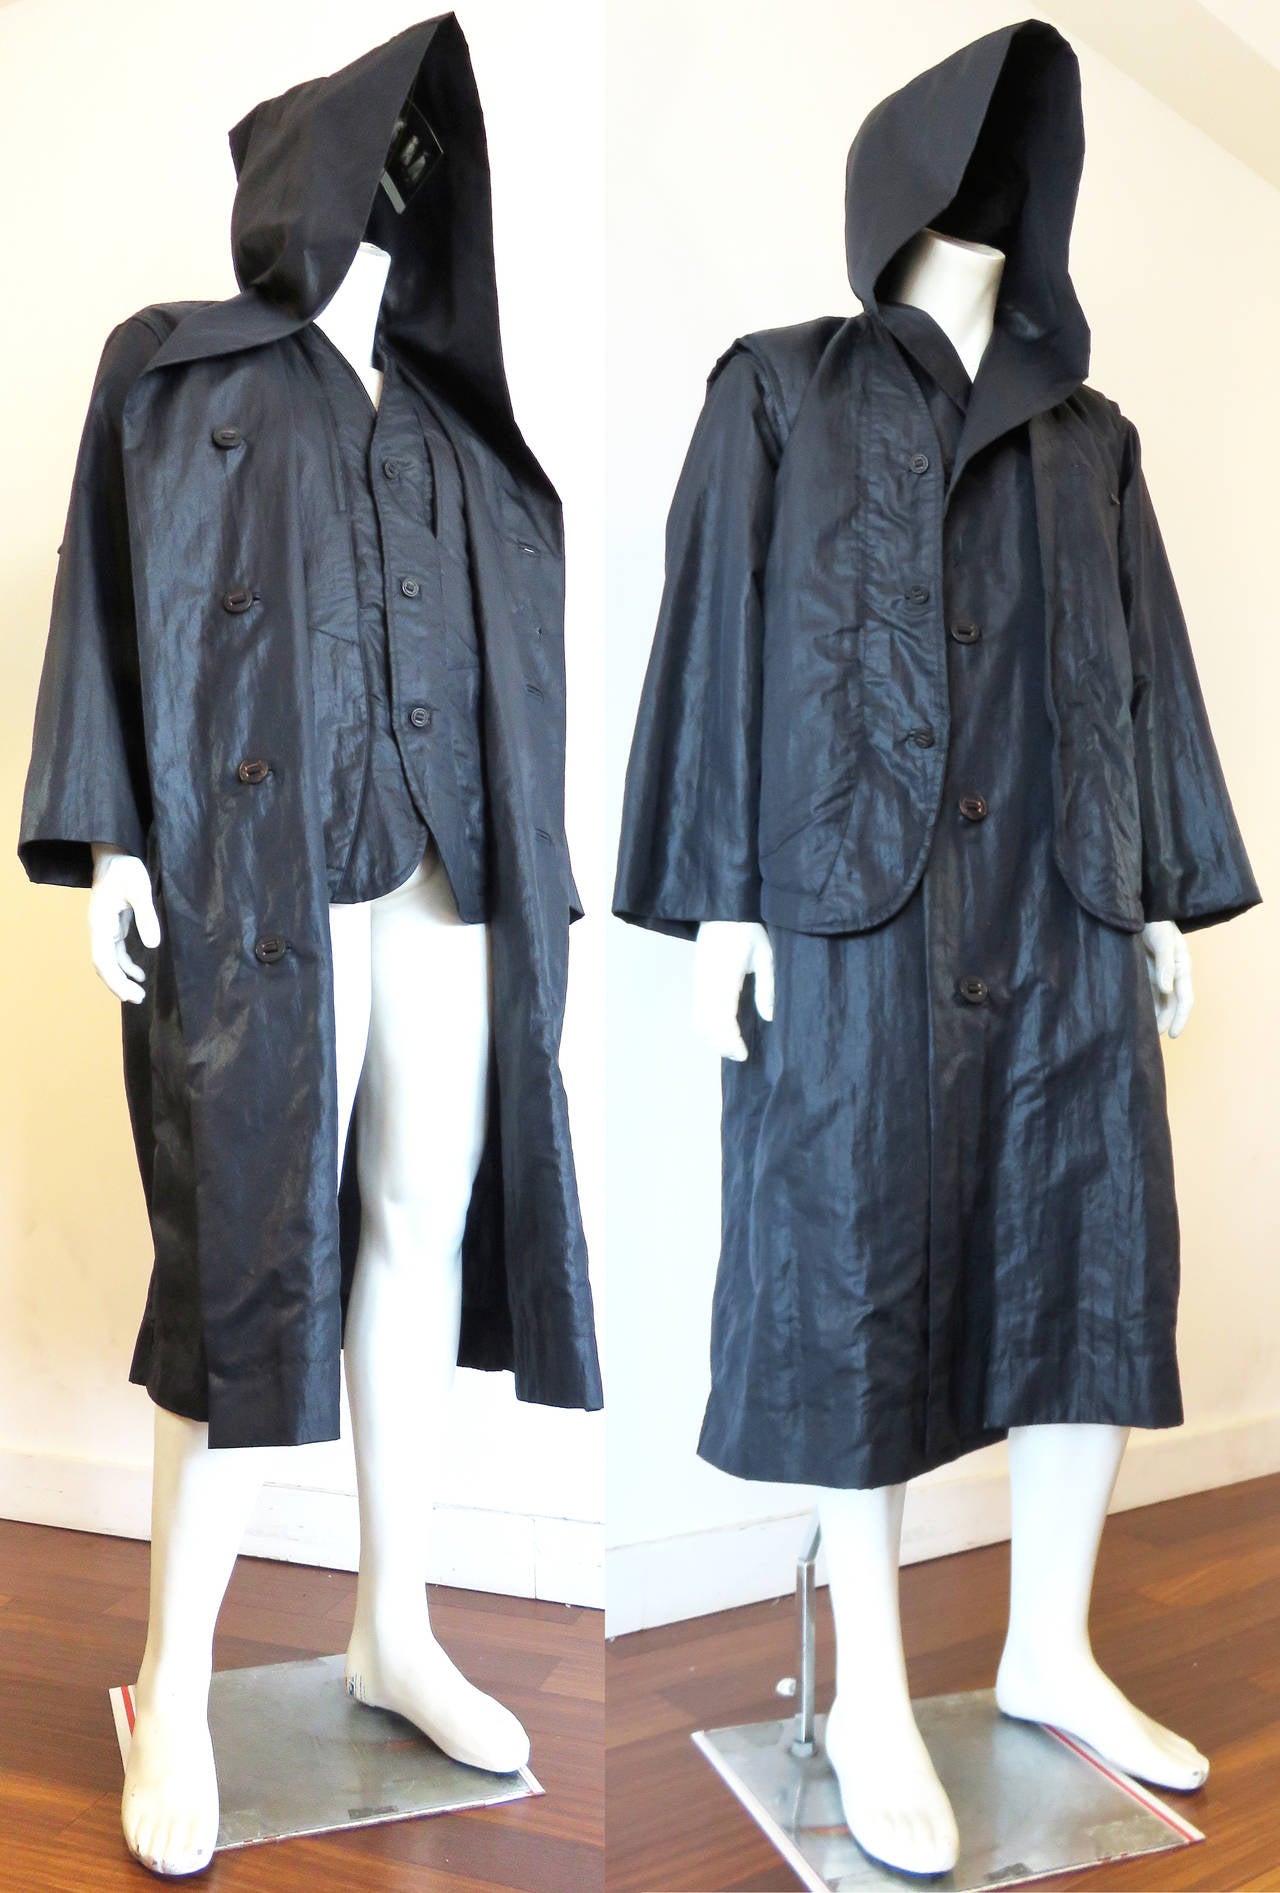 Worn once, 1988 ISSEY MIYAKE MEN, oversized hooded 2pc. coat & vest in dark midnight/ink blue, 'wet-look' fabric.

Extraordinary coat from the Issey Miyake Men's, 1988 Autumn/Winter collection. It features an oversized, seamless pointed hood that